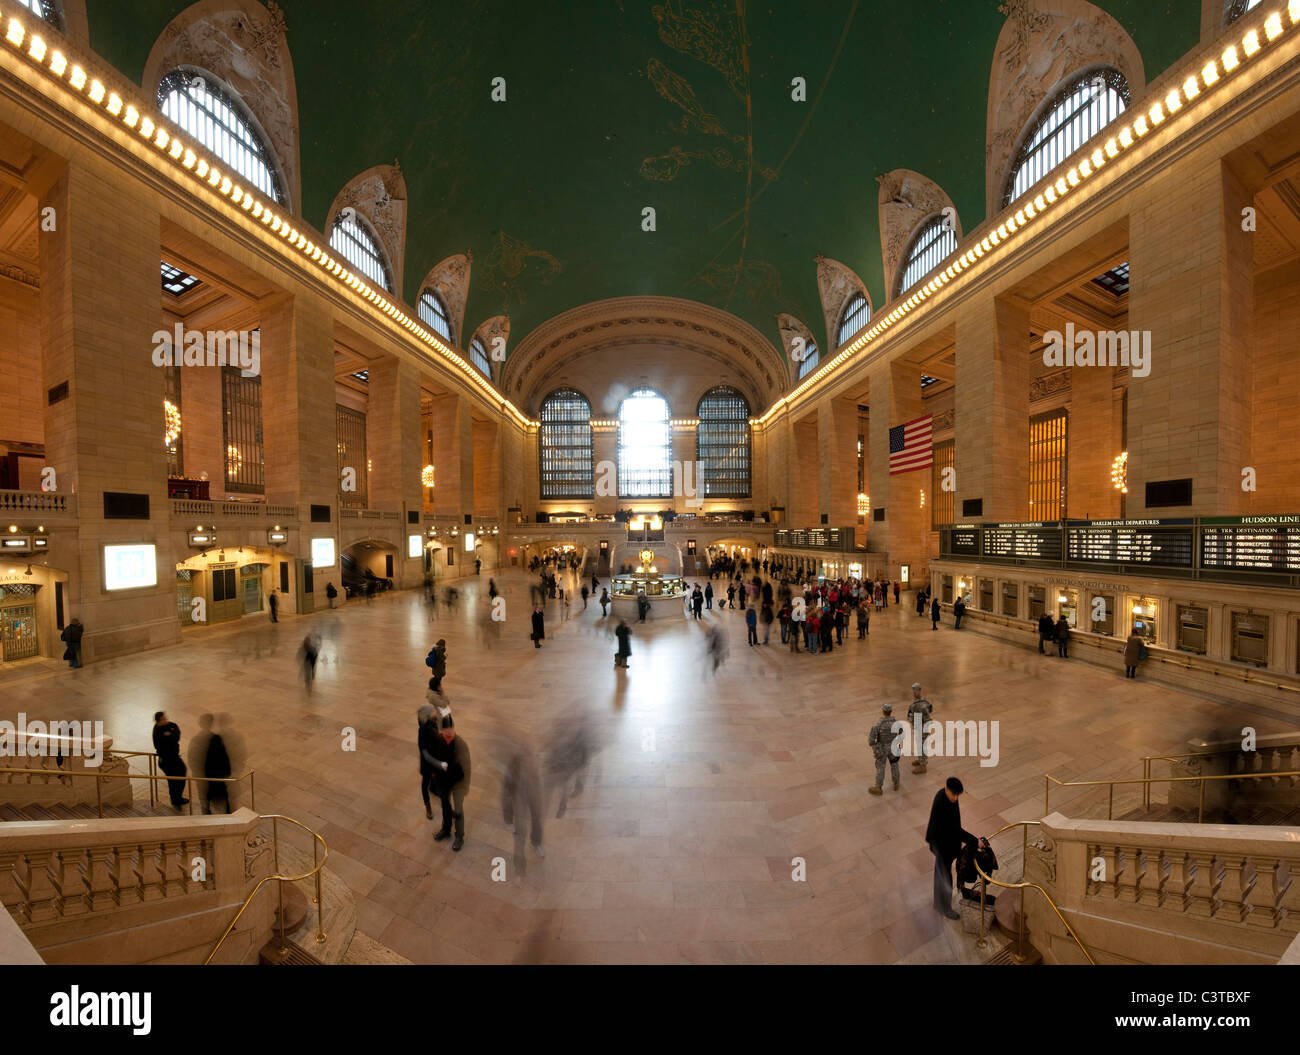 2011. Grand Central Terminal. Grand Central Station.  Panoramic photo comprised of three pictures stitched together. Stock Photo